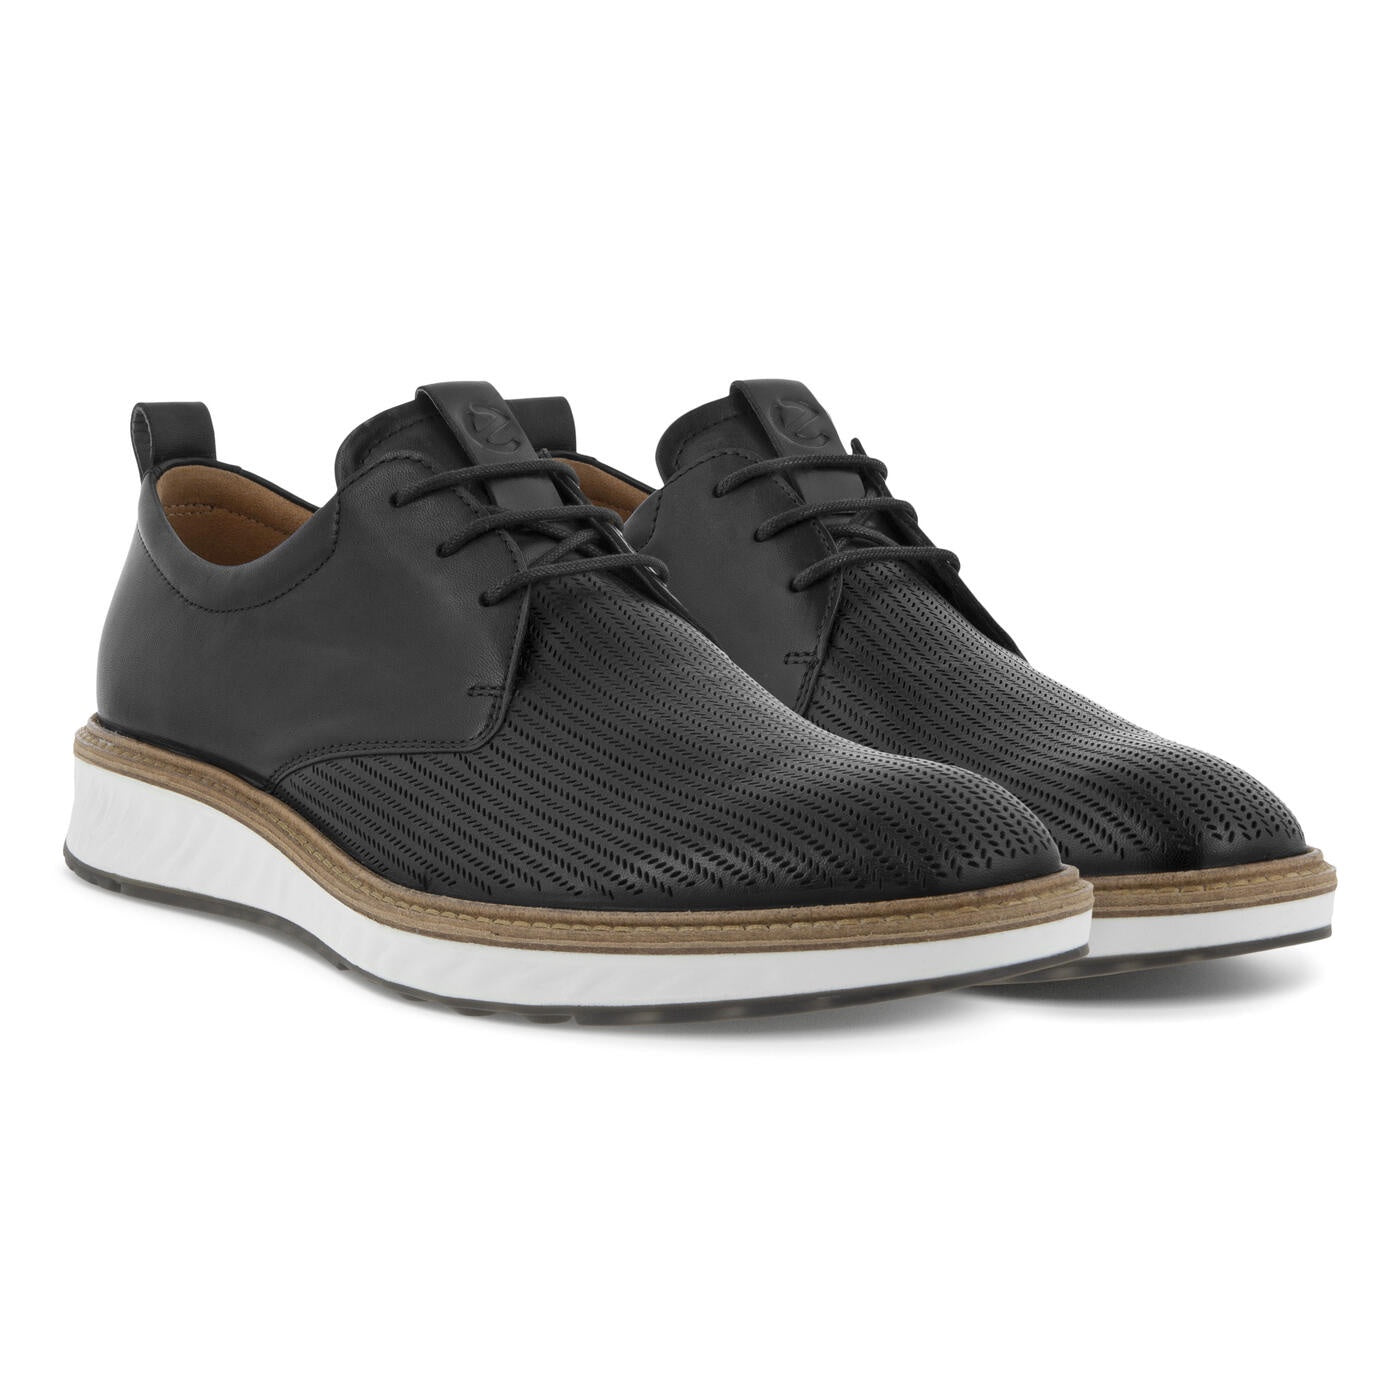 ECCO ST.1 Perforated Toe Shoe in Black